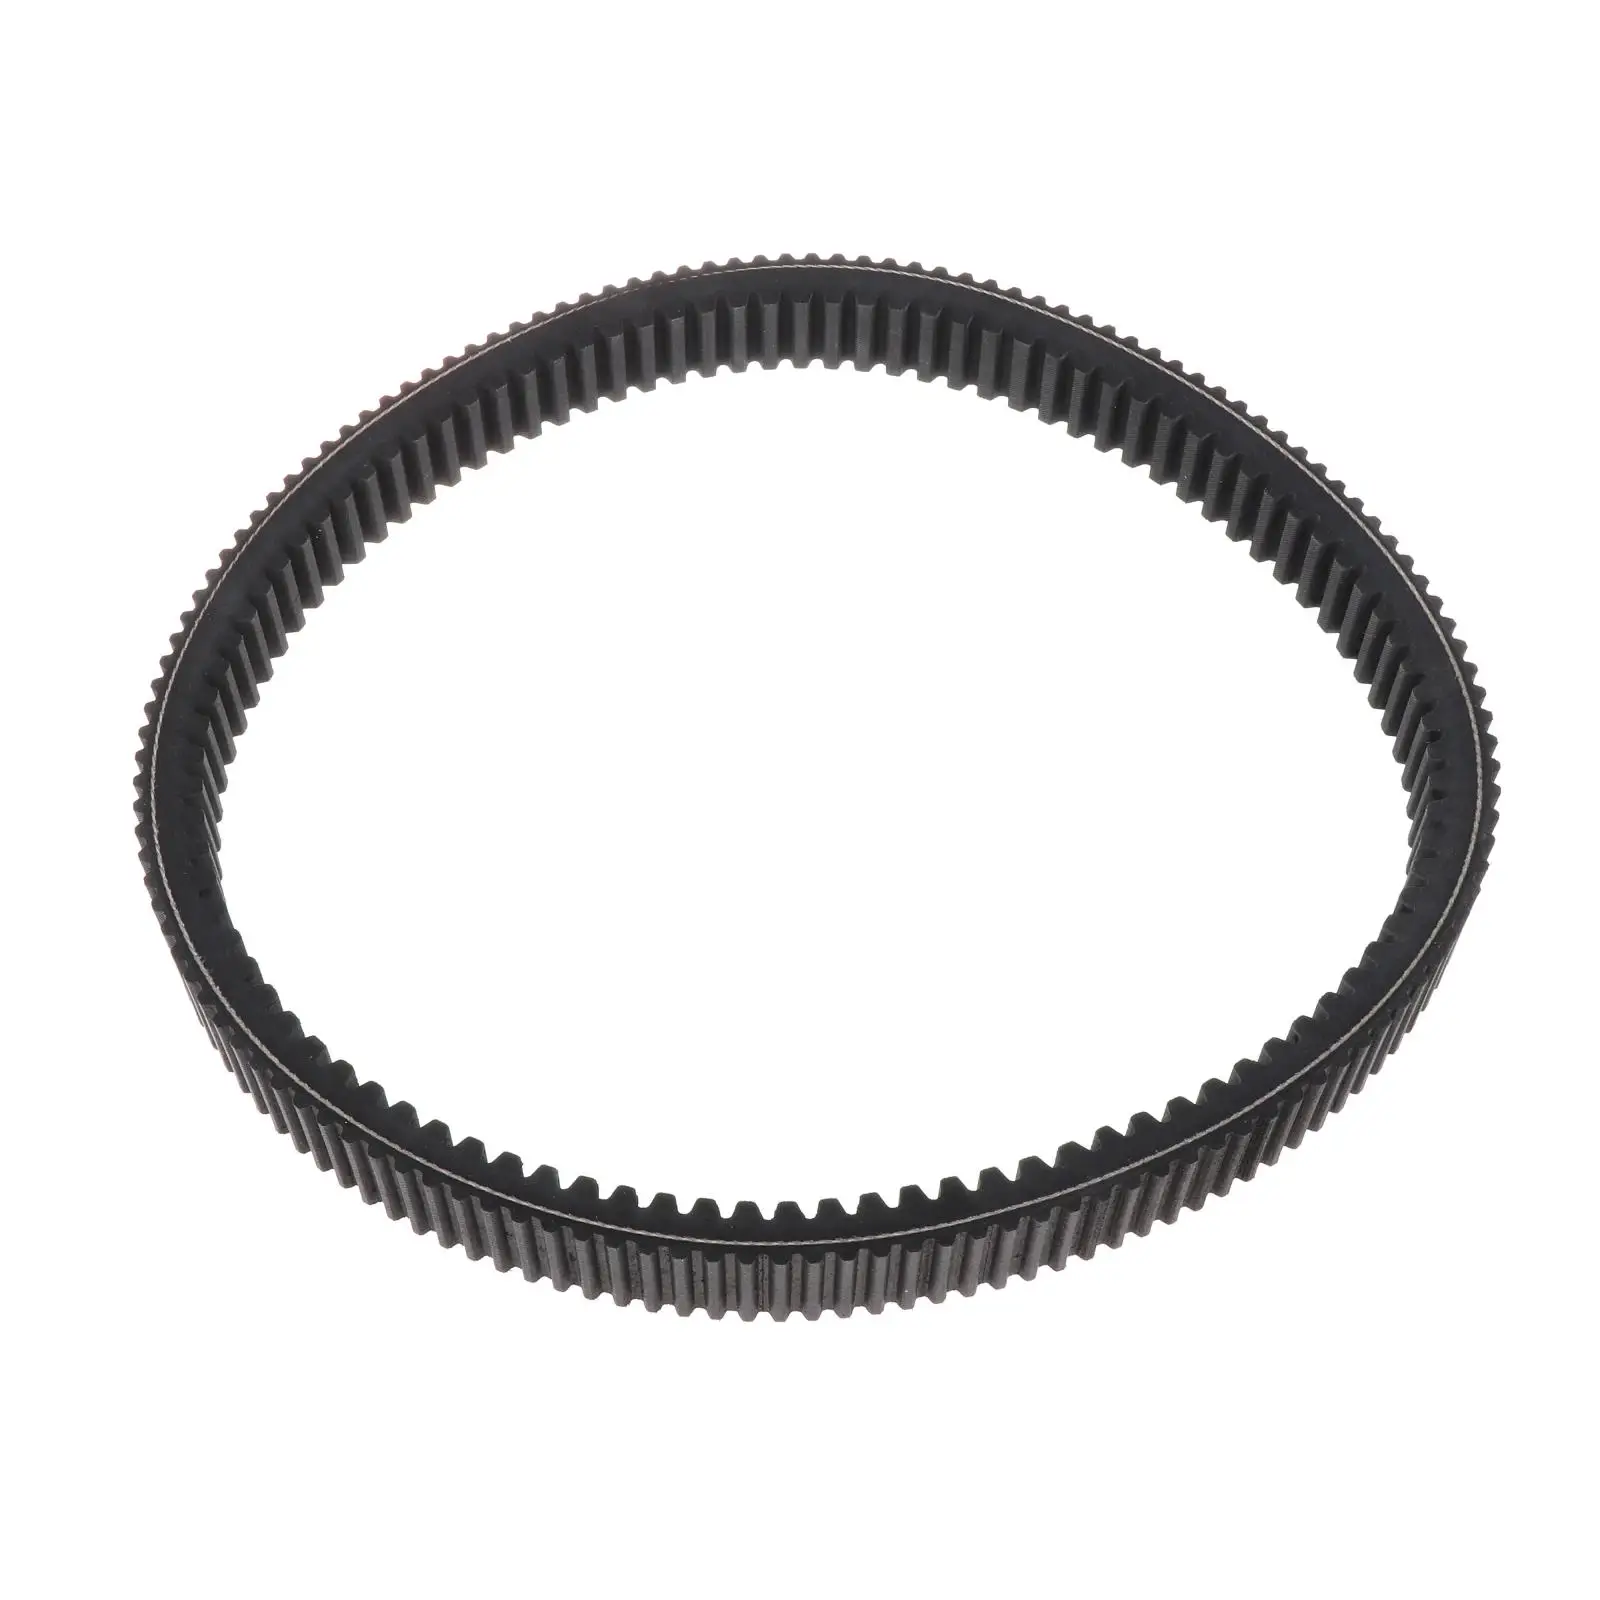 Snowmobile Performance Drive Belt Double-Sided Replace 417300571 for Ski-Doo 850 E-TEC